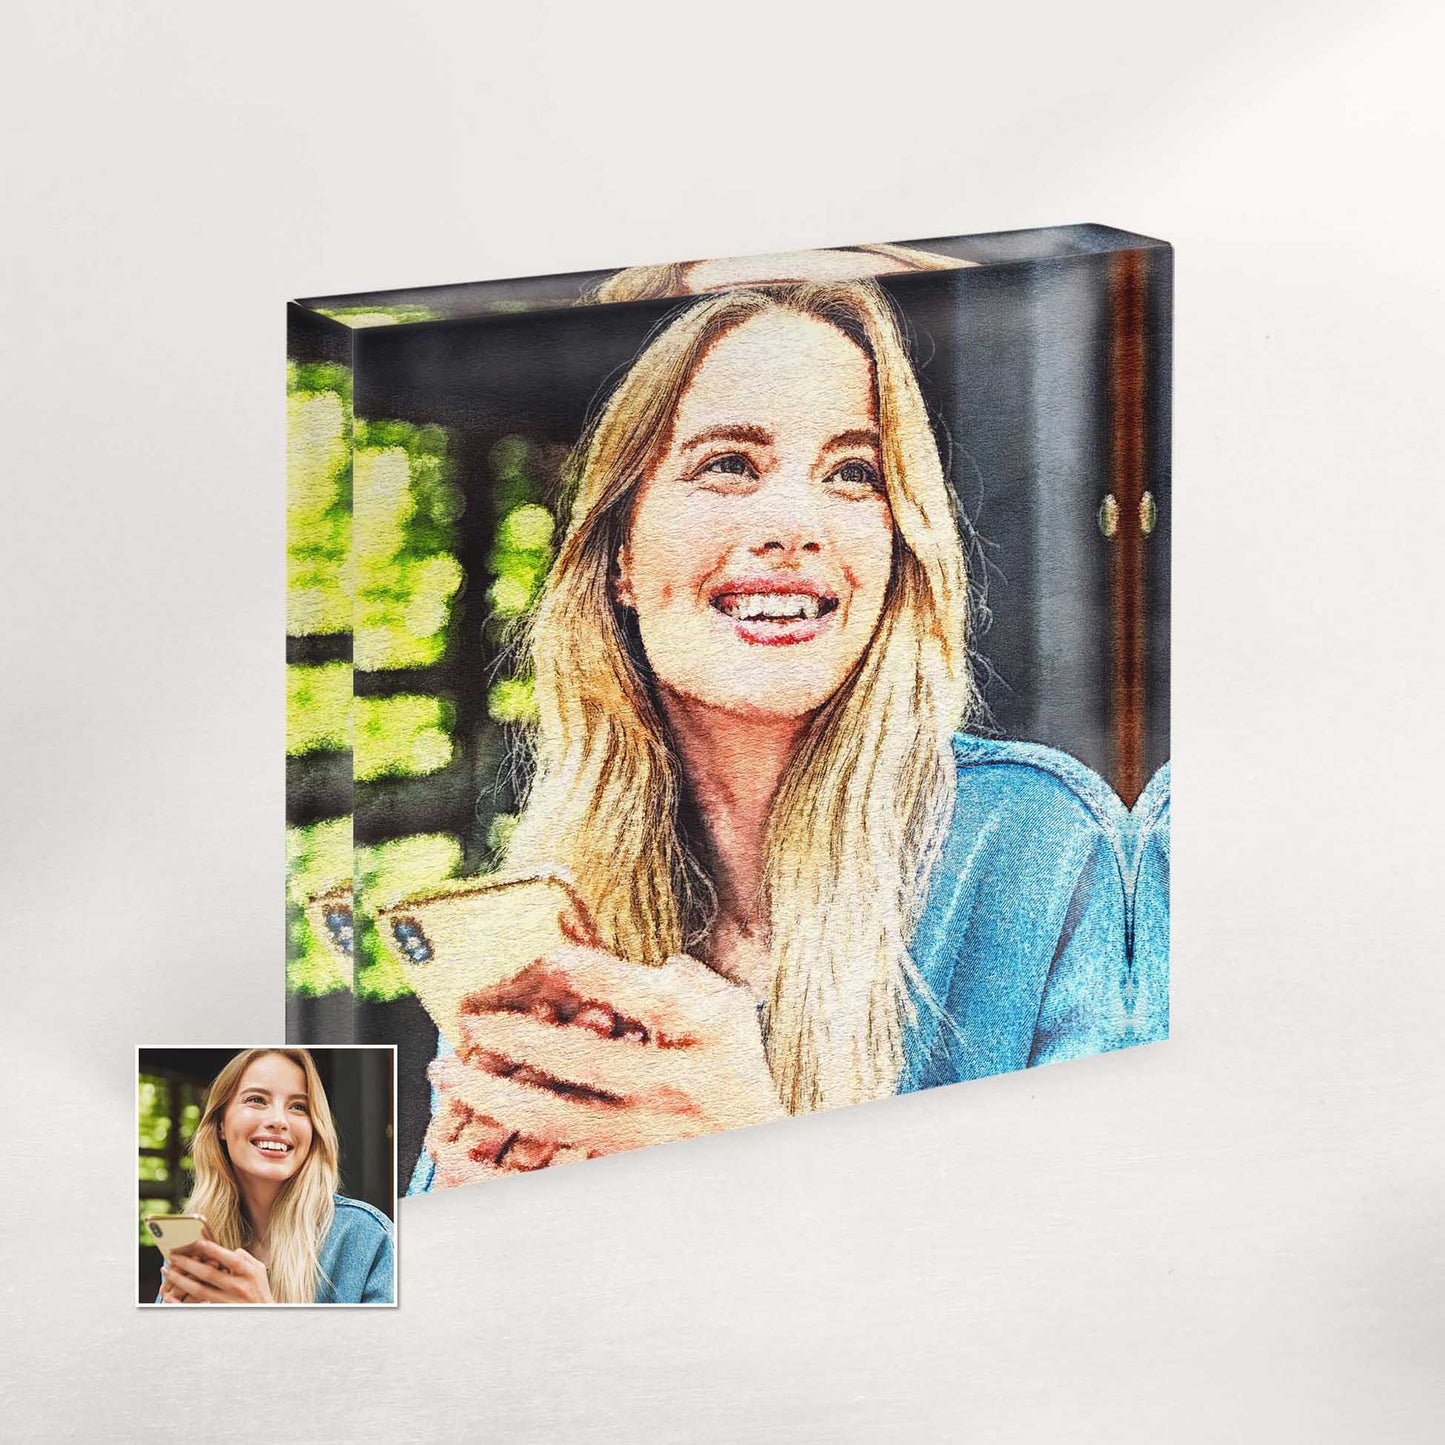 Experience the beauty of watercolor art with our Personalised Aquarelle Acrylic Block Photo. We take your favorite photo and transform it into a mesmerizing piece that resembles a hand-painted watercolor